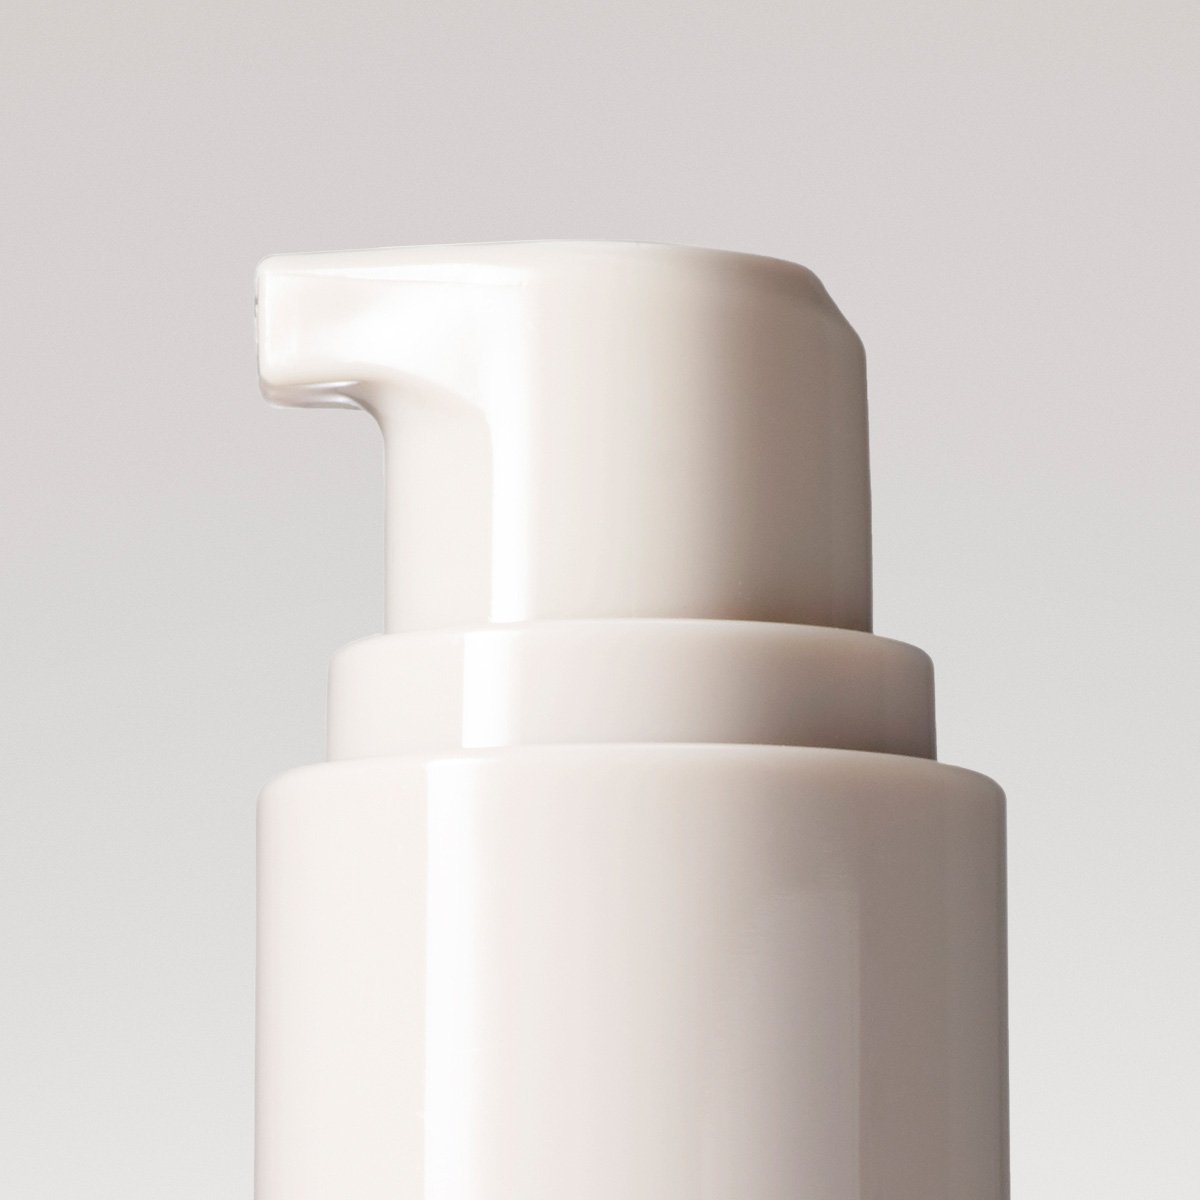 Zoomed in image of the Radiant Reveal Brightening Serum pump